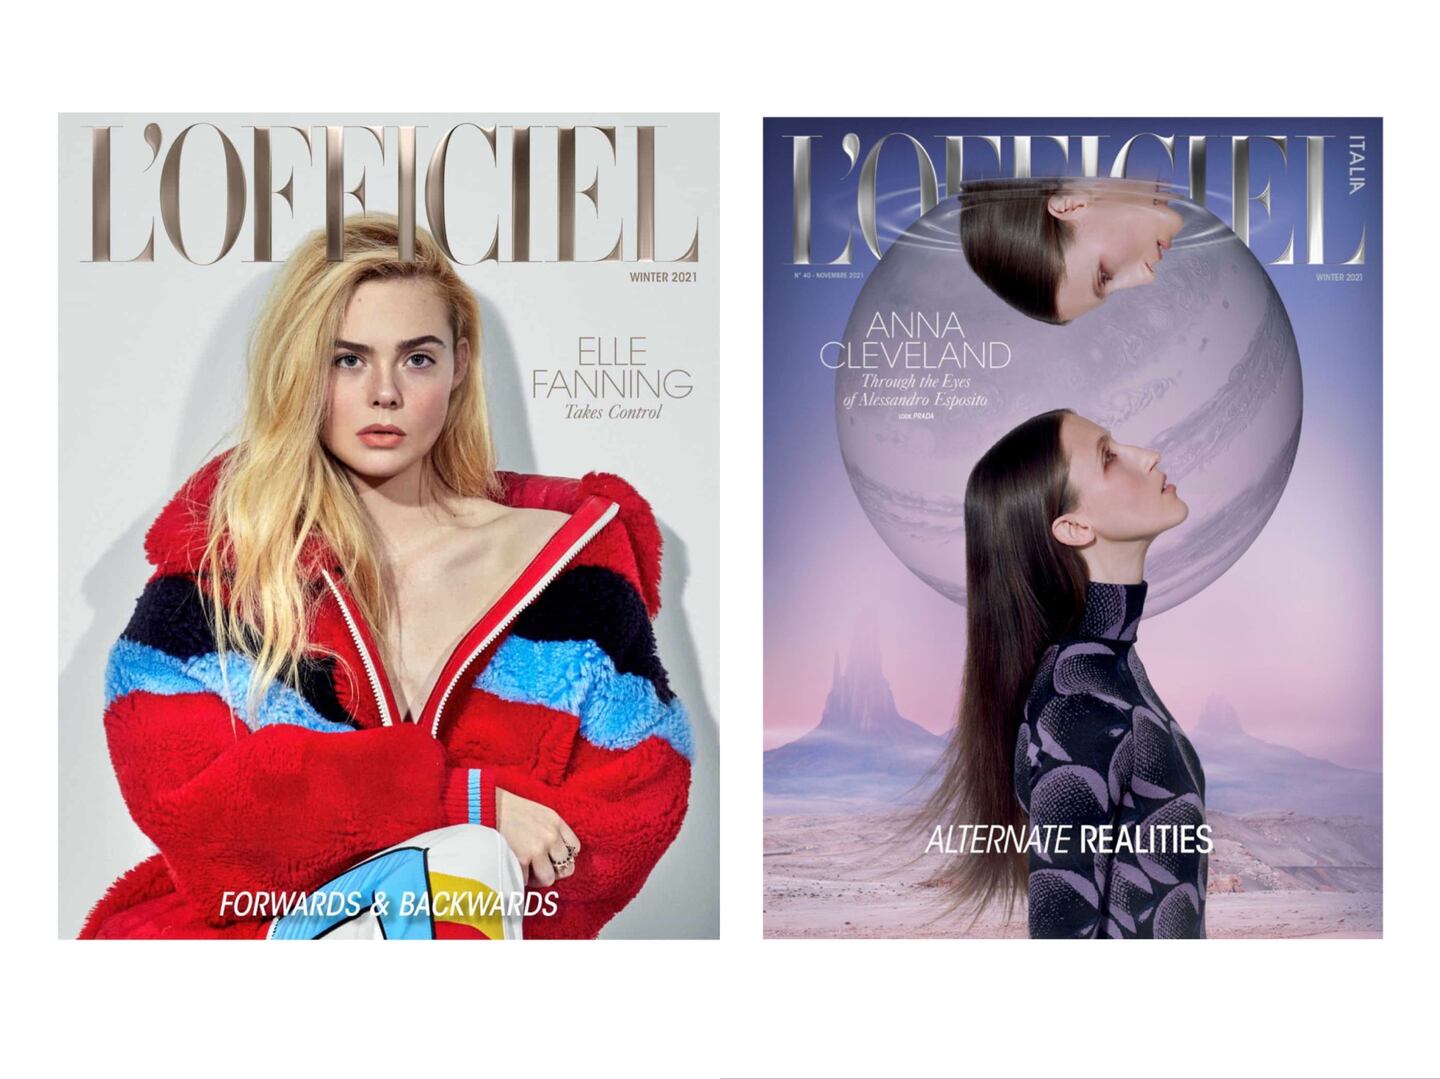 The 100-year-old French fashion and lifestyle magazine with a network of global editions has a new owner.